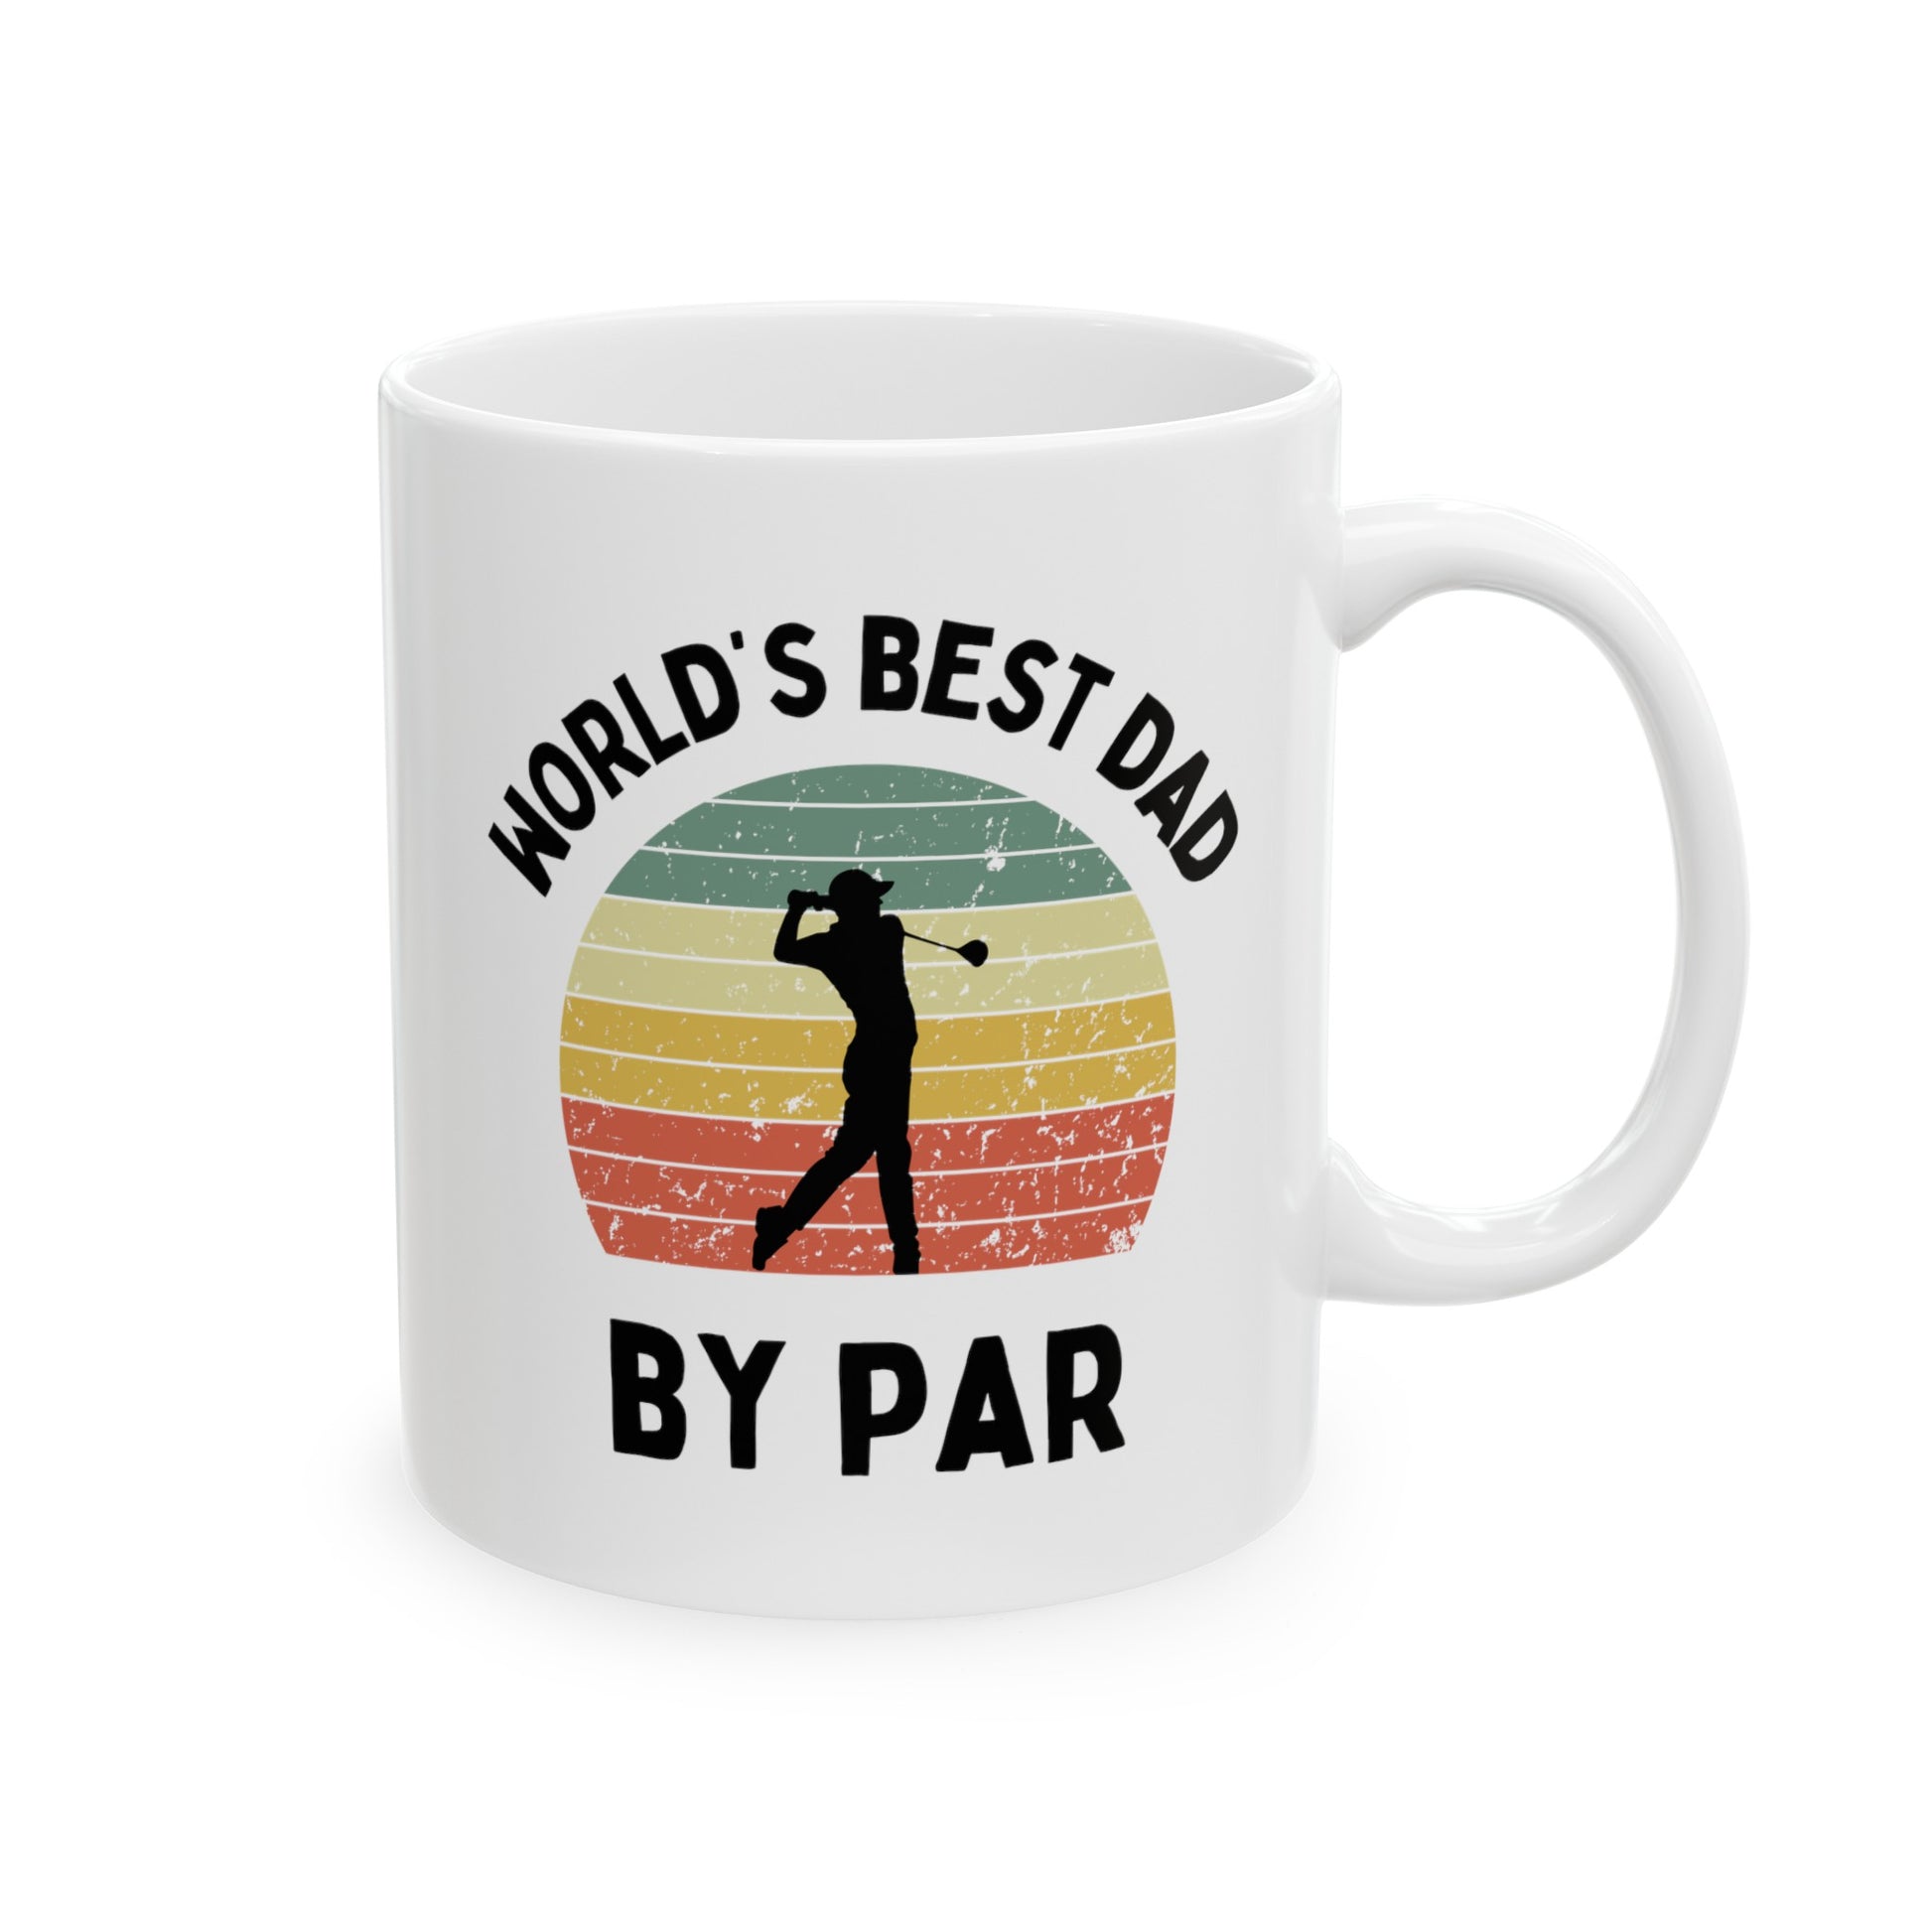 World's Best Dad By Par 11oz white funny coffee mug tea cup gift for him golfer vintage sunset golf men him pops father's day birthday christmas waveywares wavey wares wavywares wavy wares